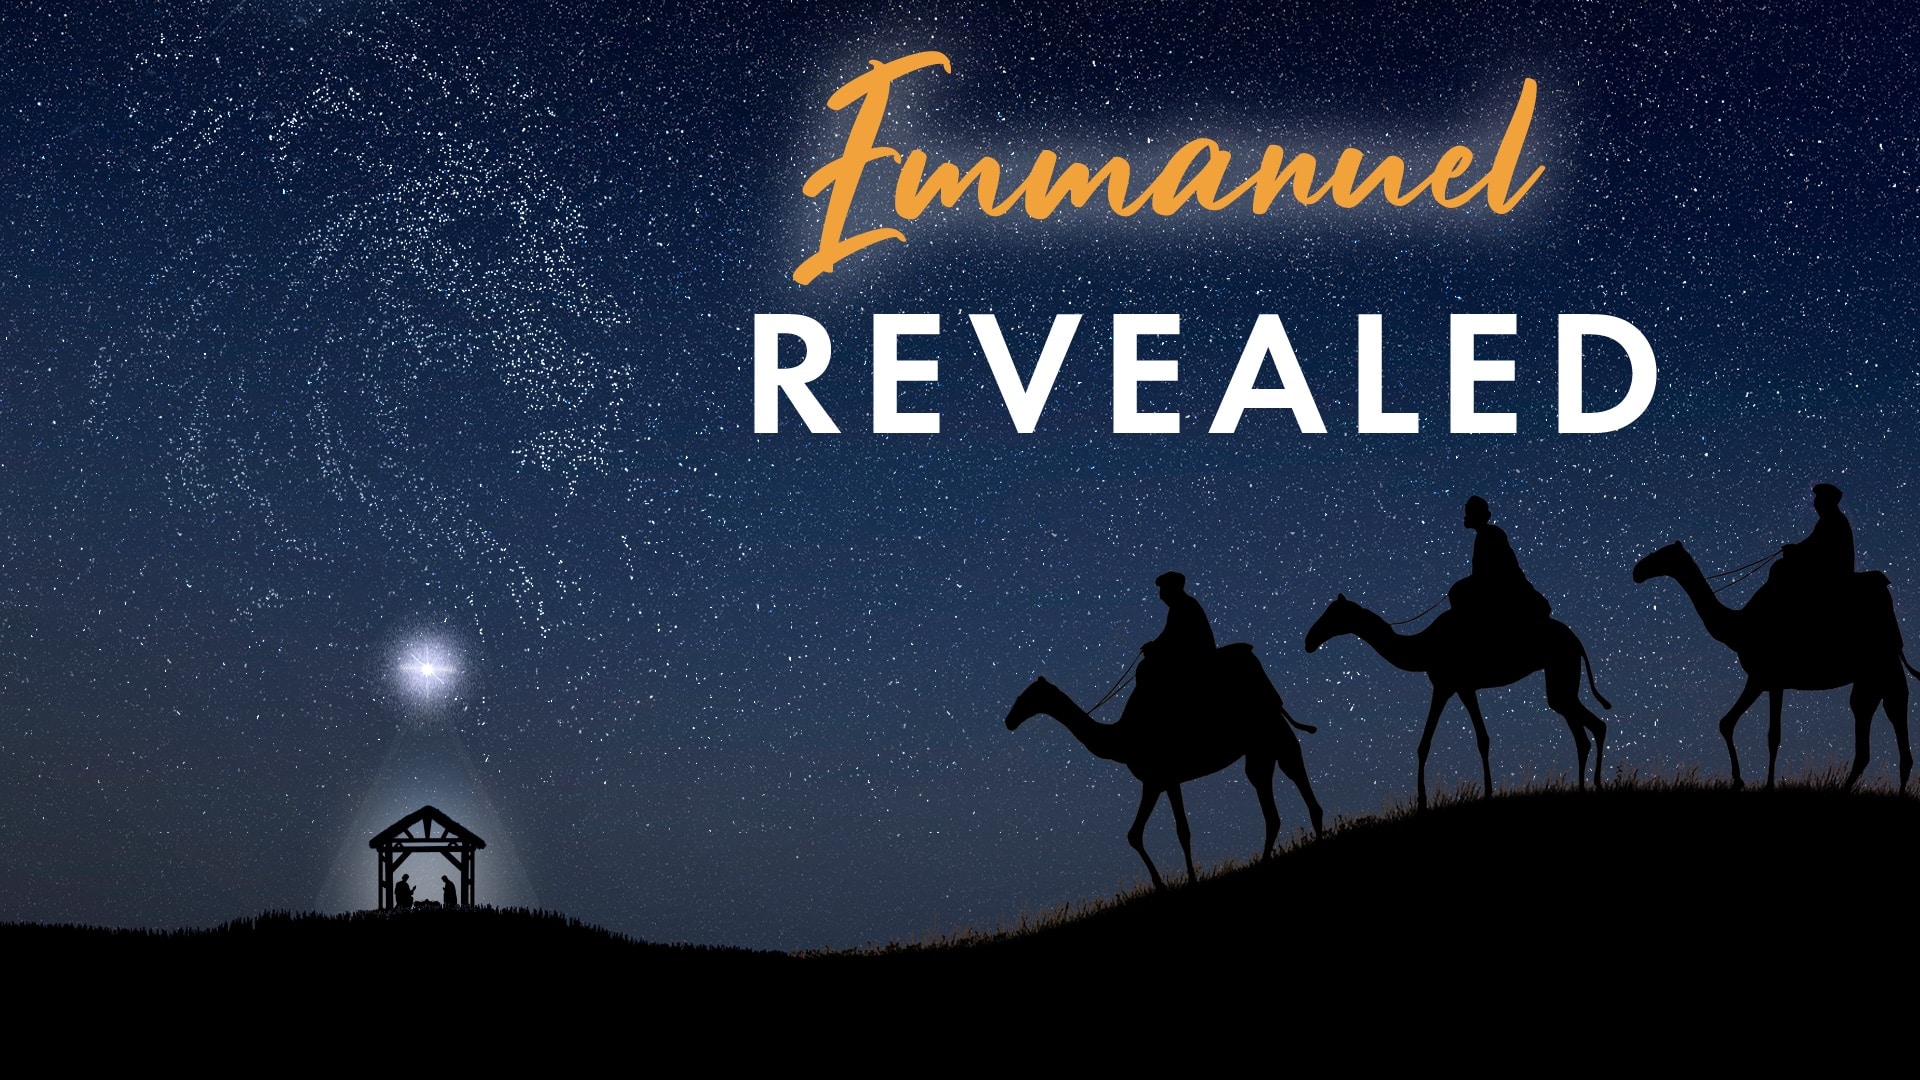 Emmanuel Revealed: The Child and the Dragon